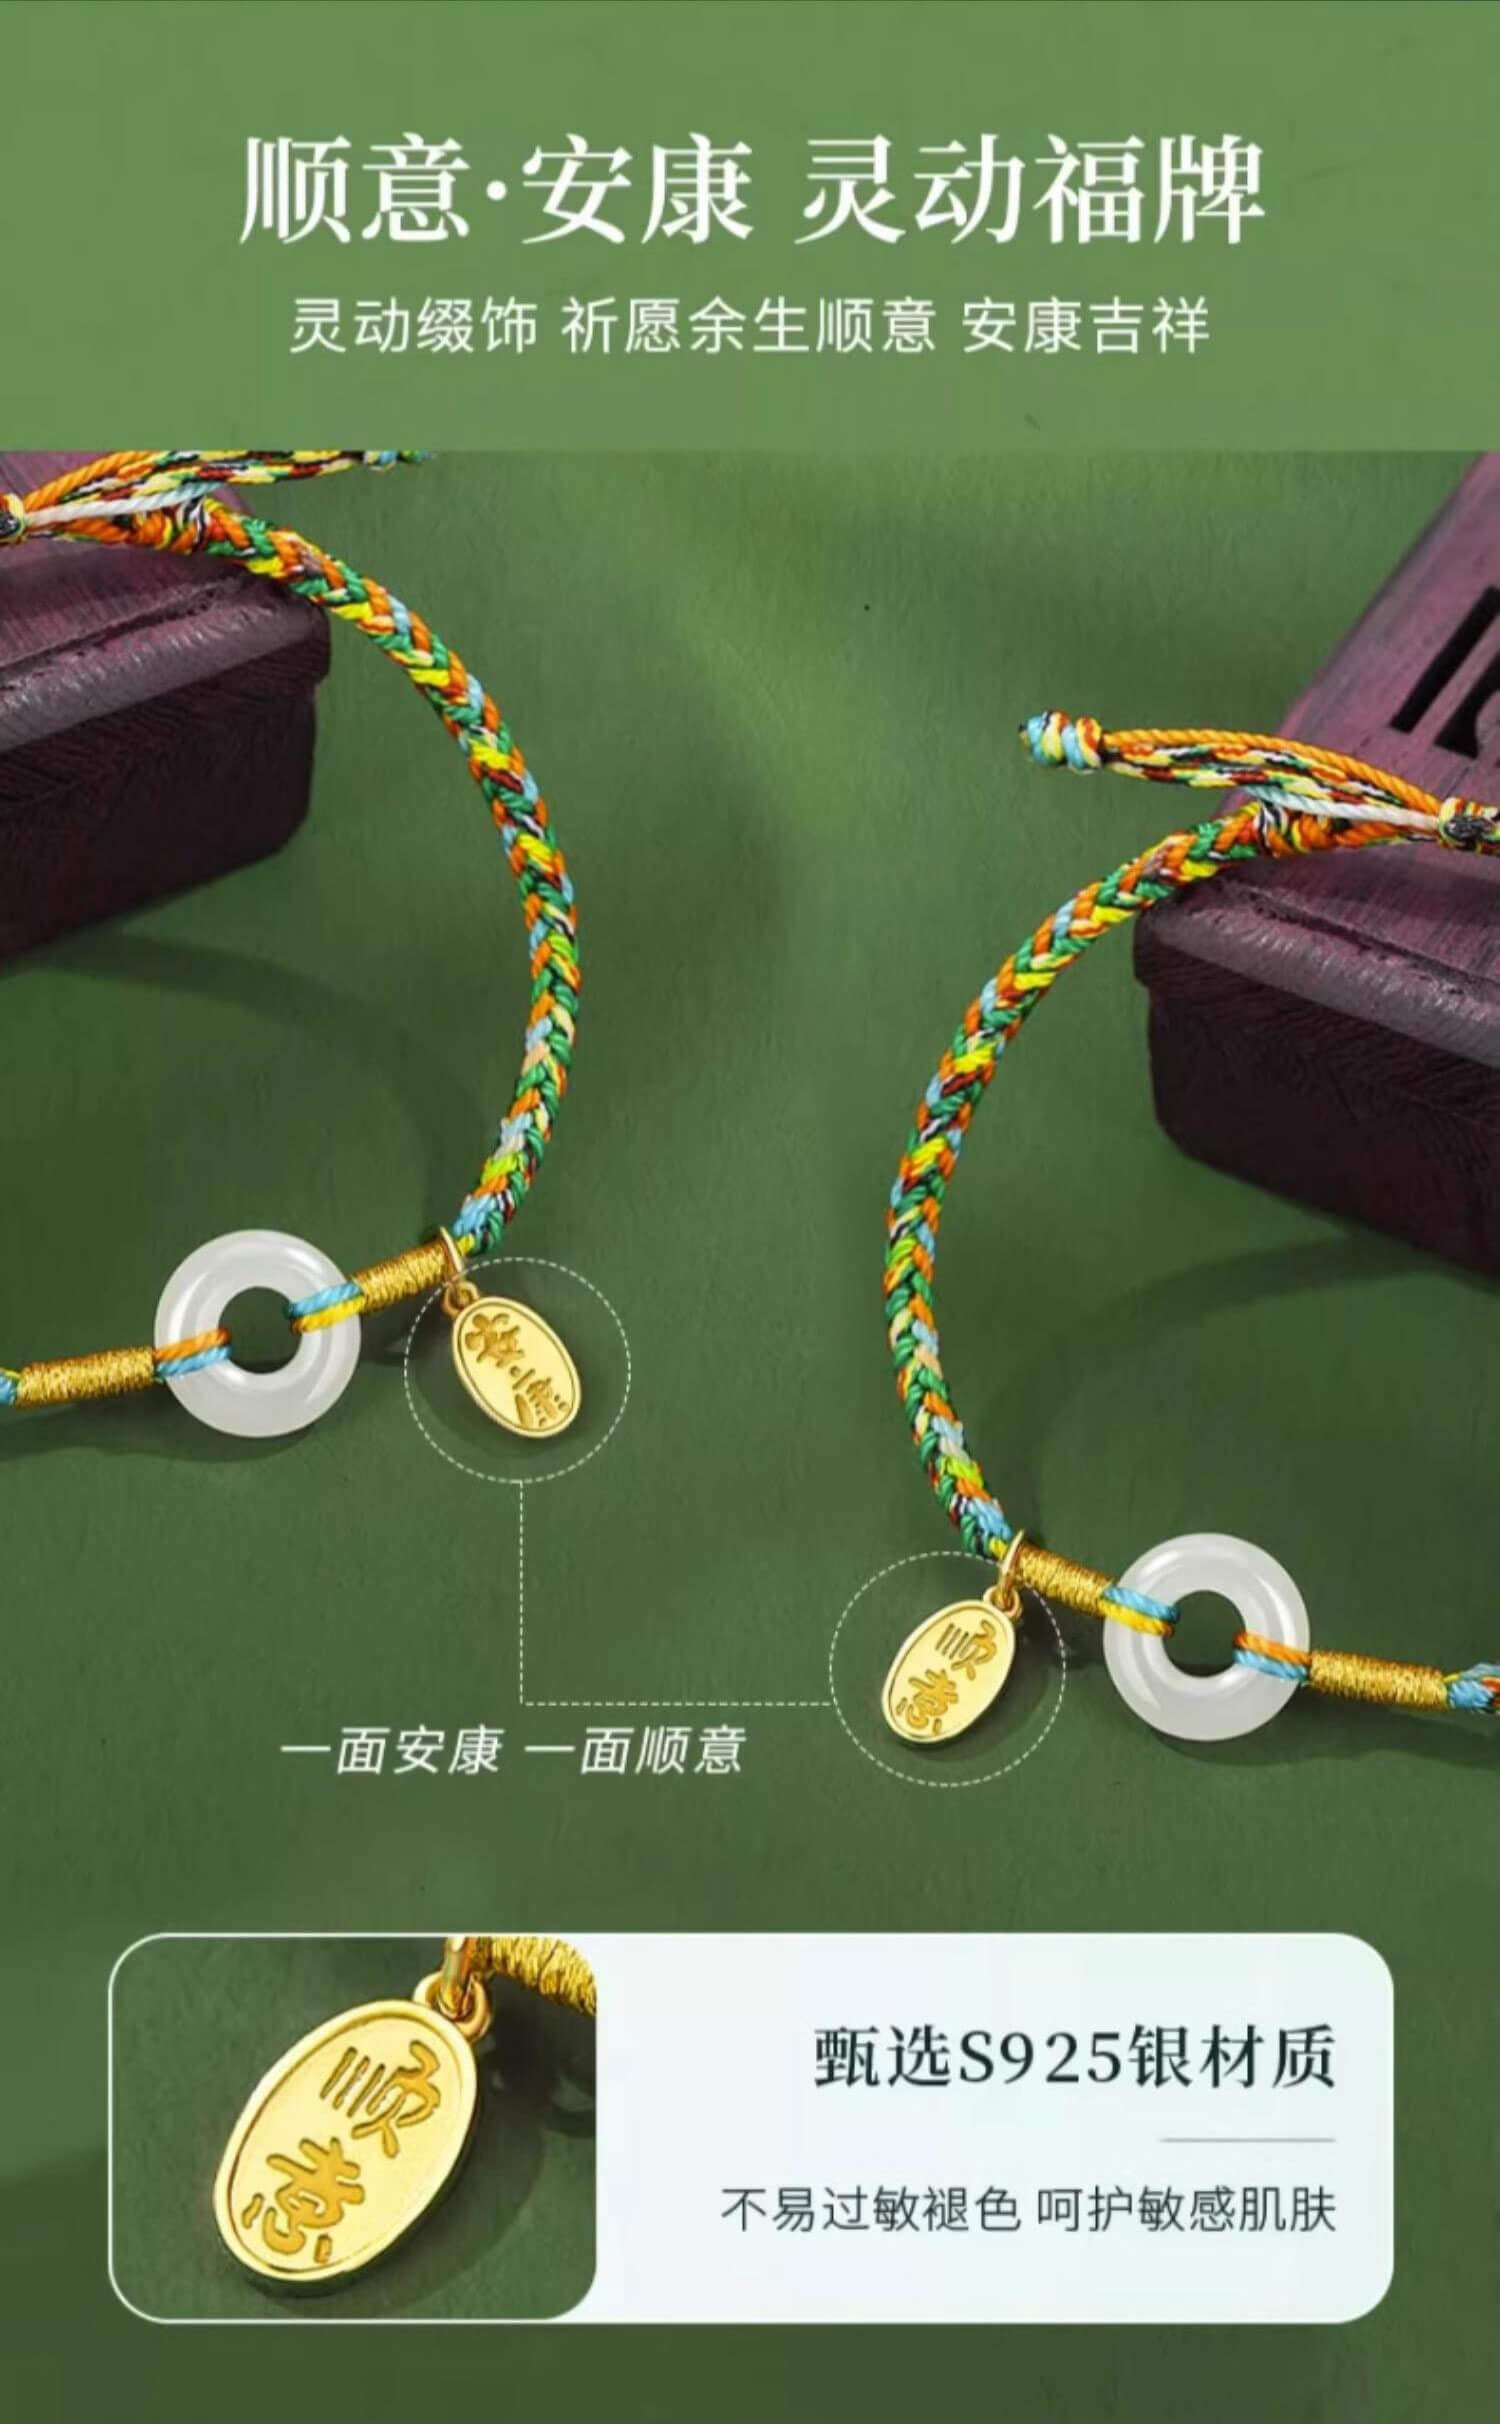 《Dragon Boat Festival Blessings》 Dragon Boat Festival Multicolored Rope and Hetian Jade Safety Buckle Bracelet